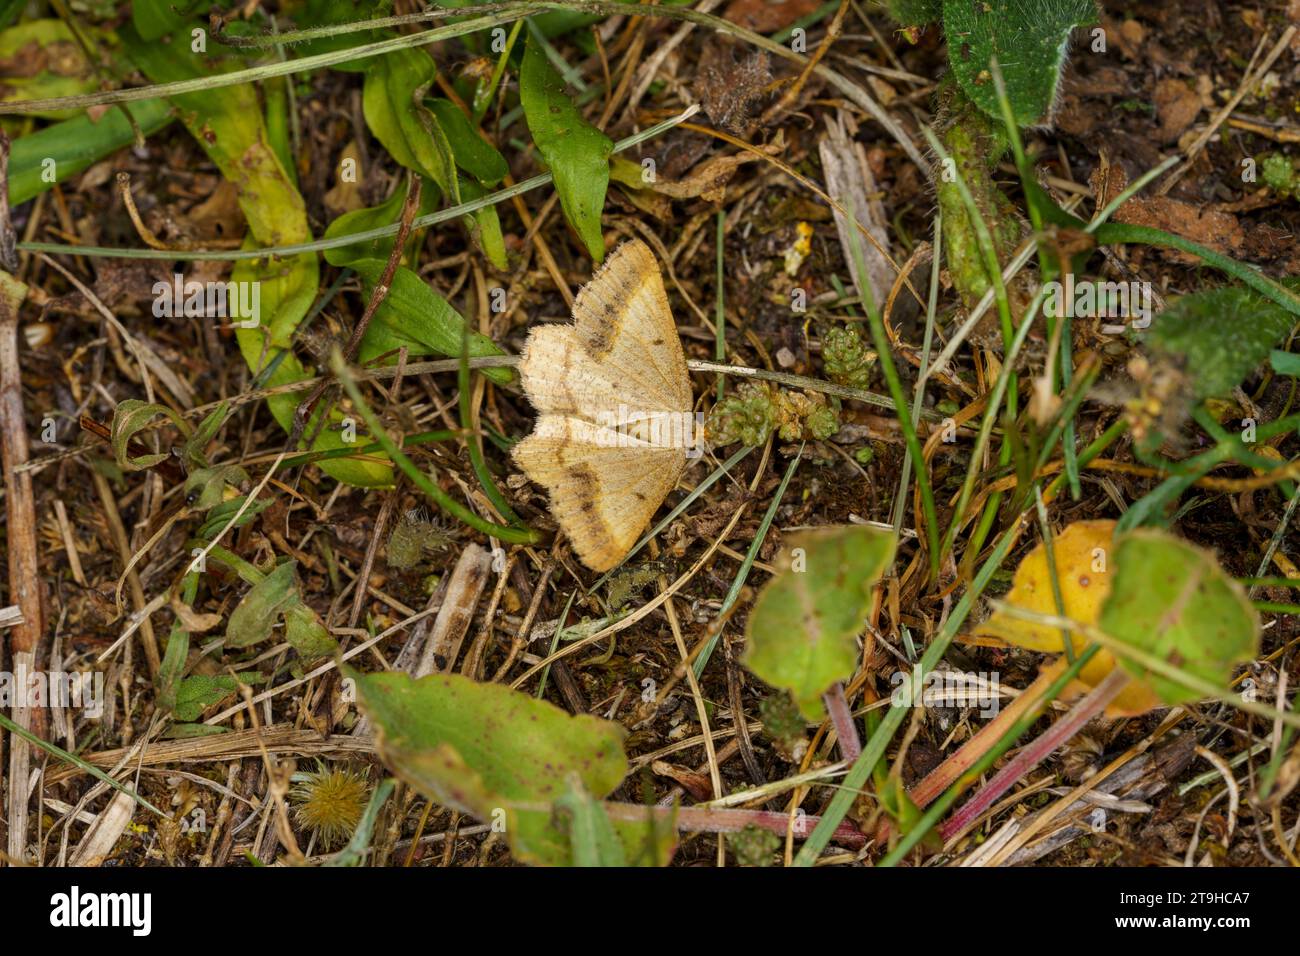 Isturgia arenacearia Family Geometridae Genus Isturgia The sand bordered bloom moth wild nature insect wallpaper, picture, photography Stock Photo